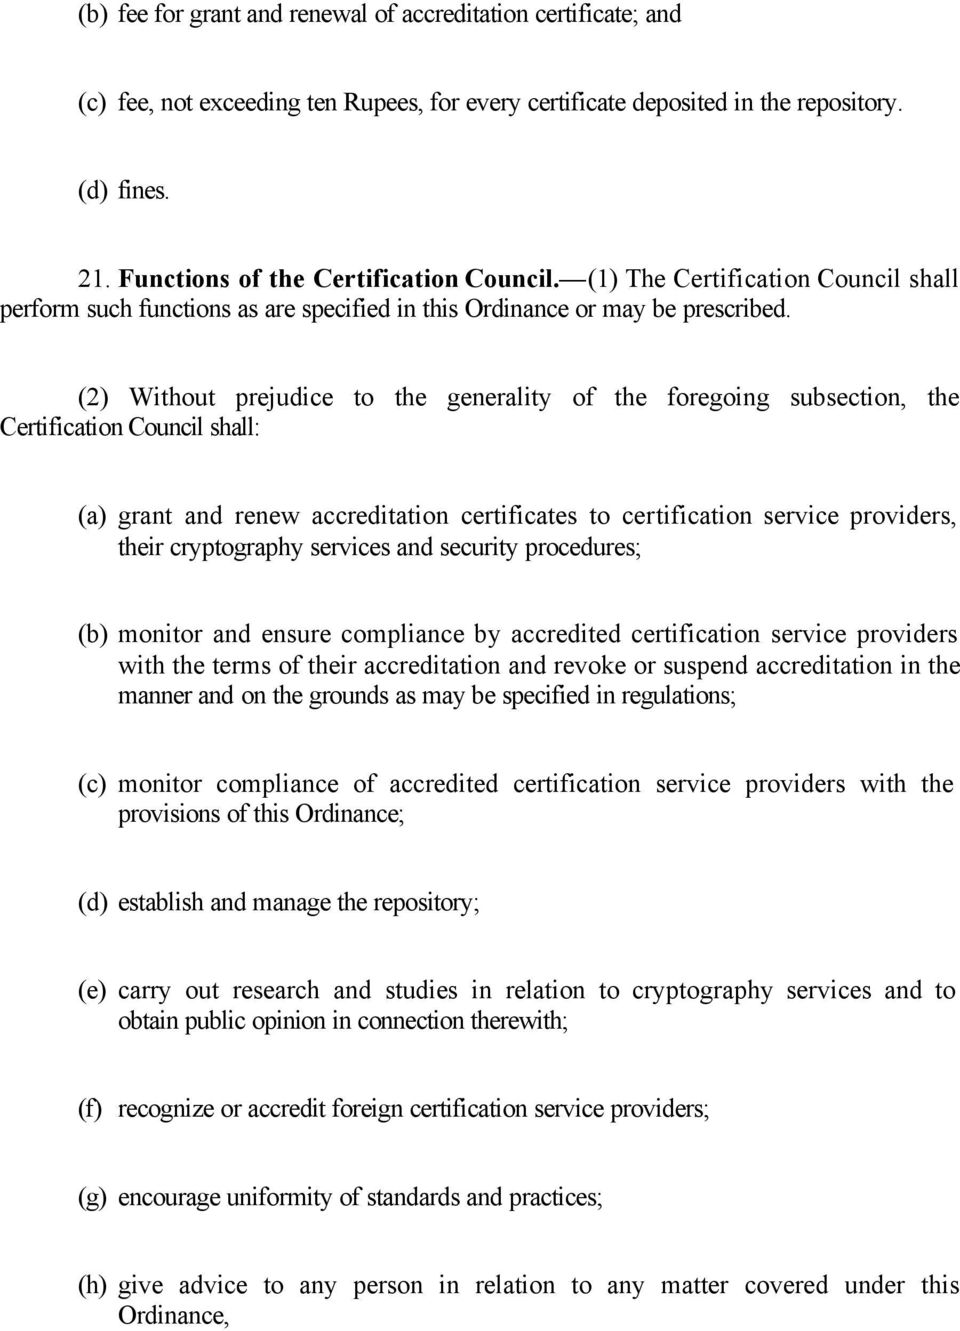 (2) Without prejudice to the generality of the foregoing subsection, the Certification Council shall: (a) grant and renew accreditation certificates to certification service providers, their